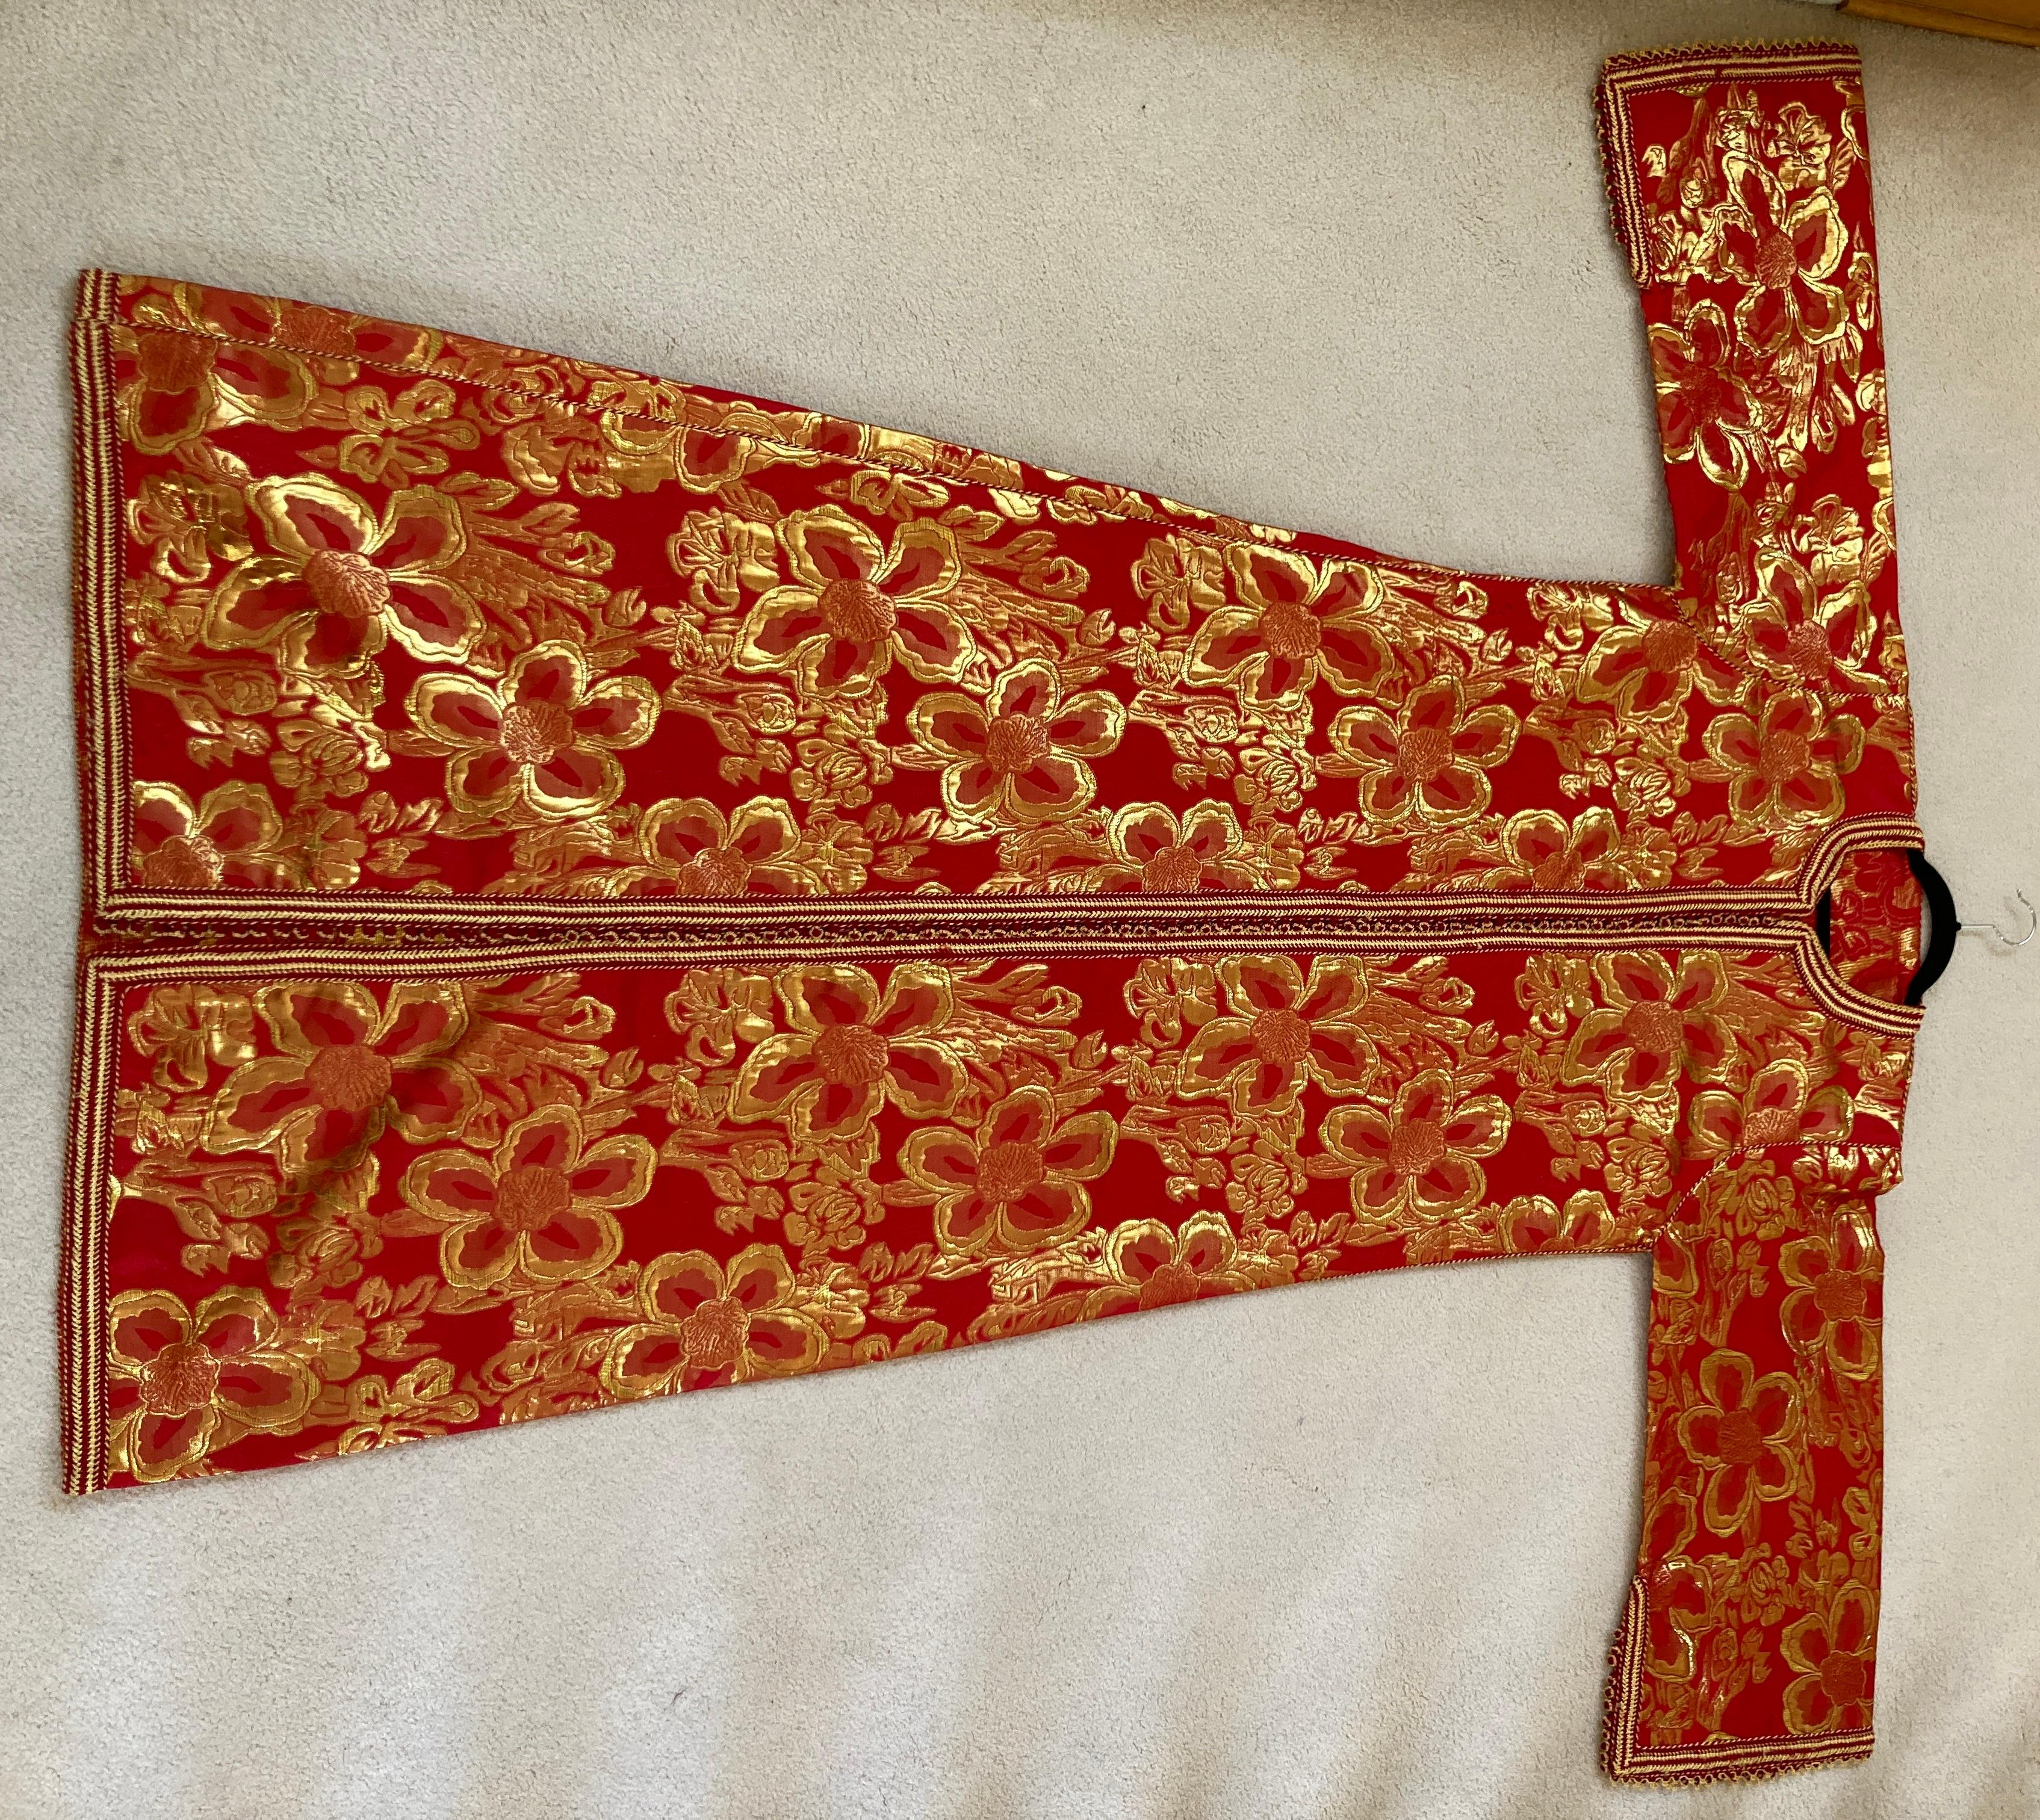 1970s Vintage Moroccan Kaftan Red and Gold Brocade Caftan Maxi Dress For Sale 14